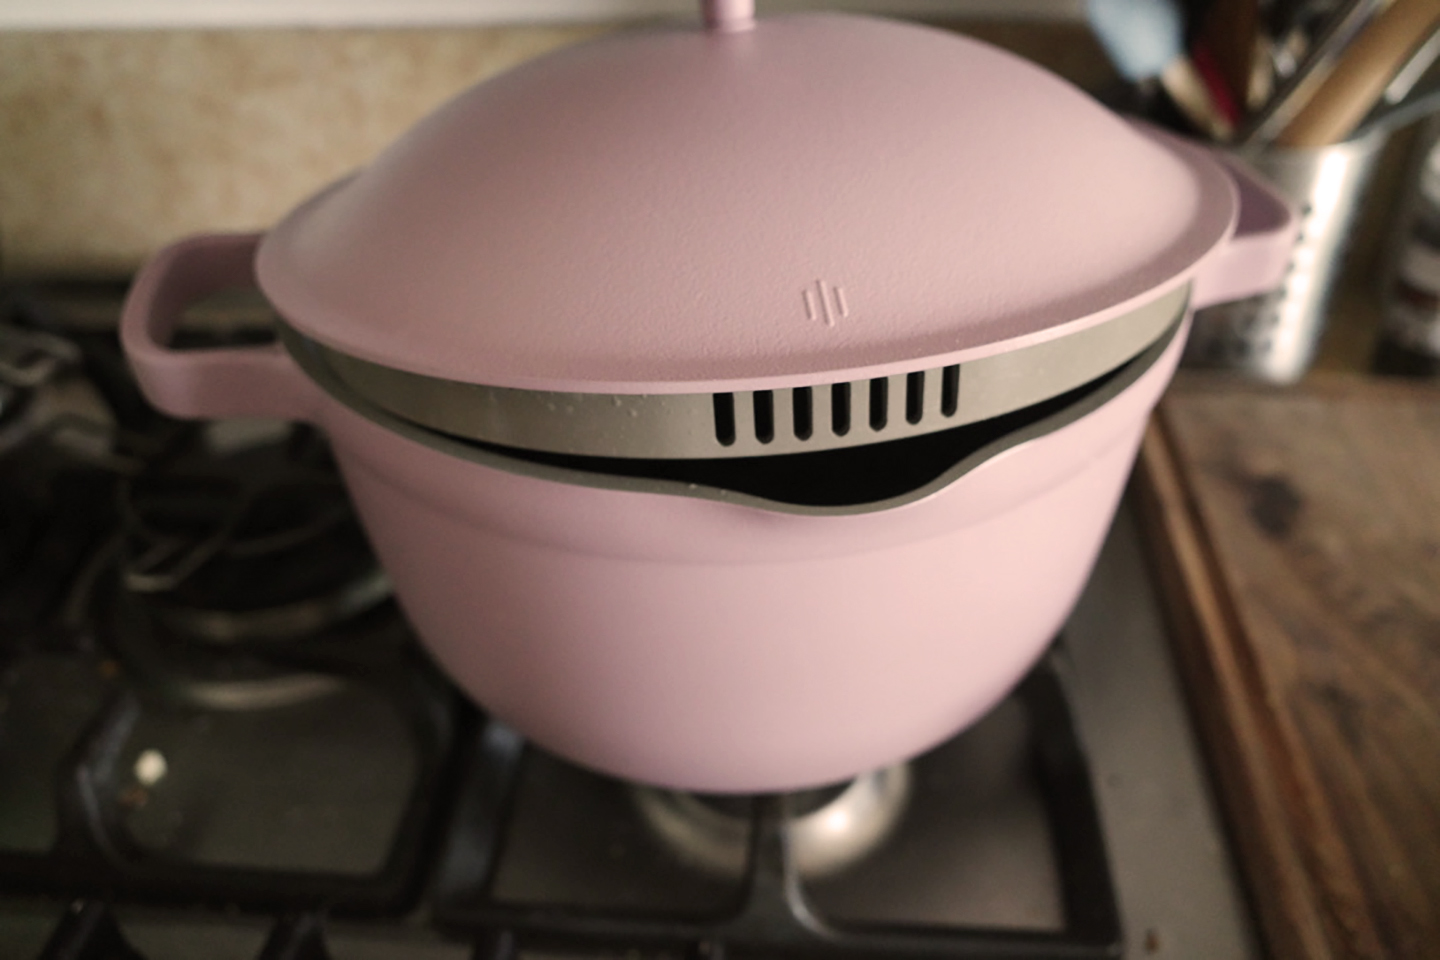 Our Place Perfect Pot review - strainer in the Perfect Pot